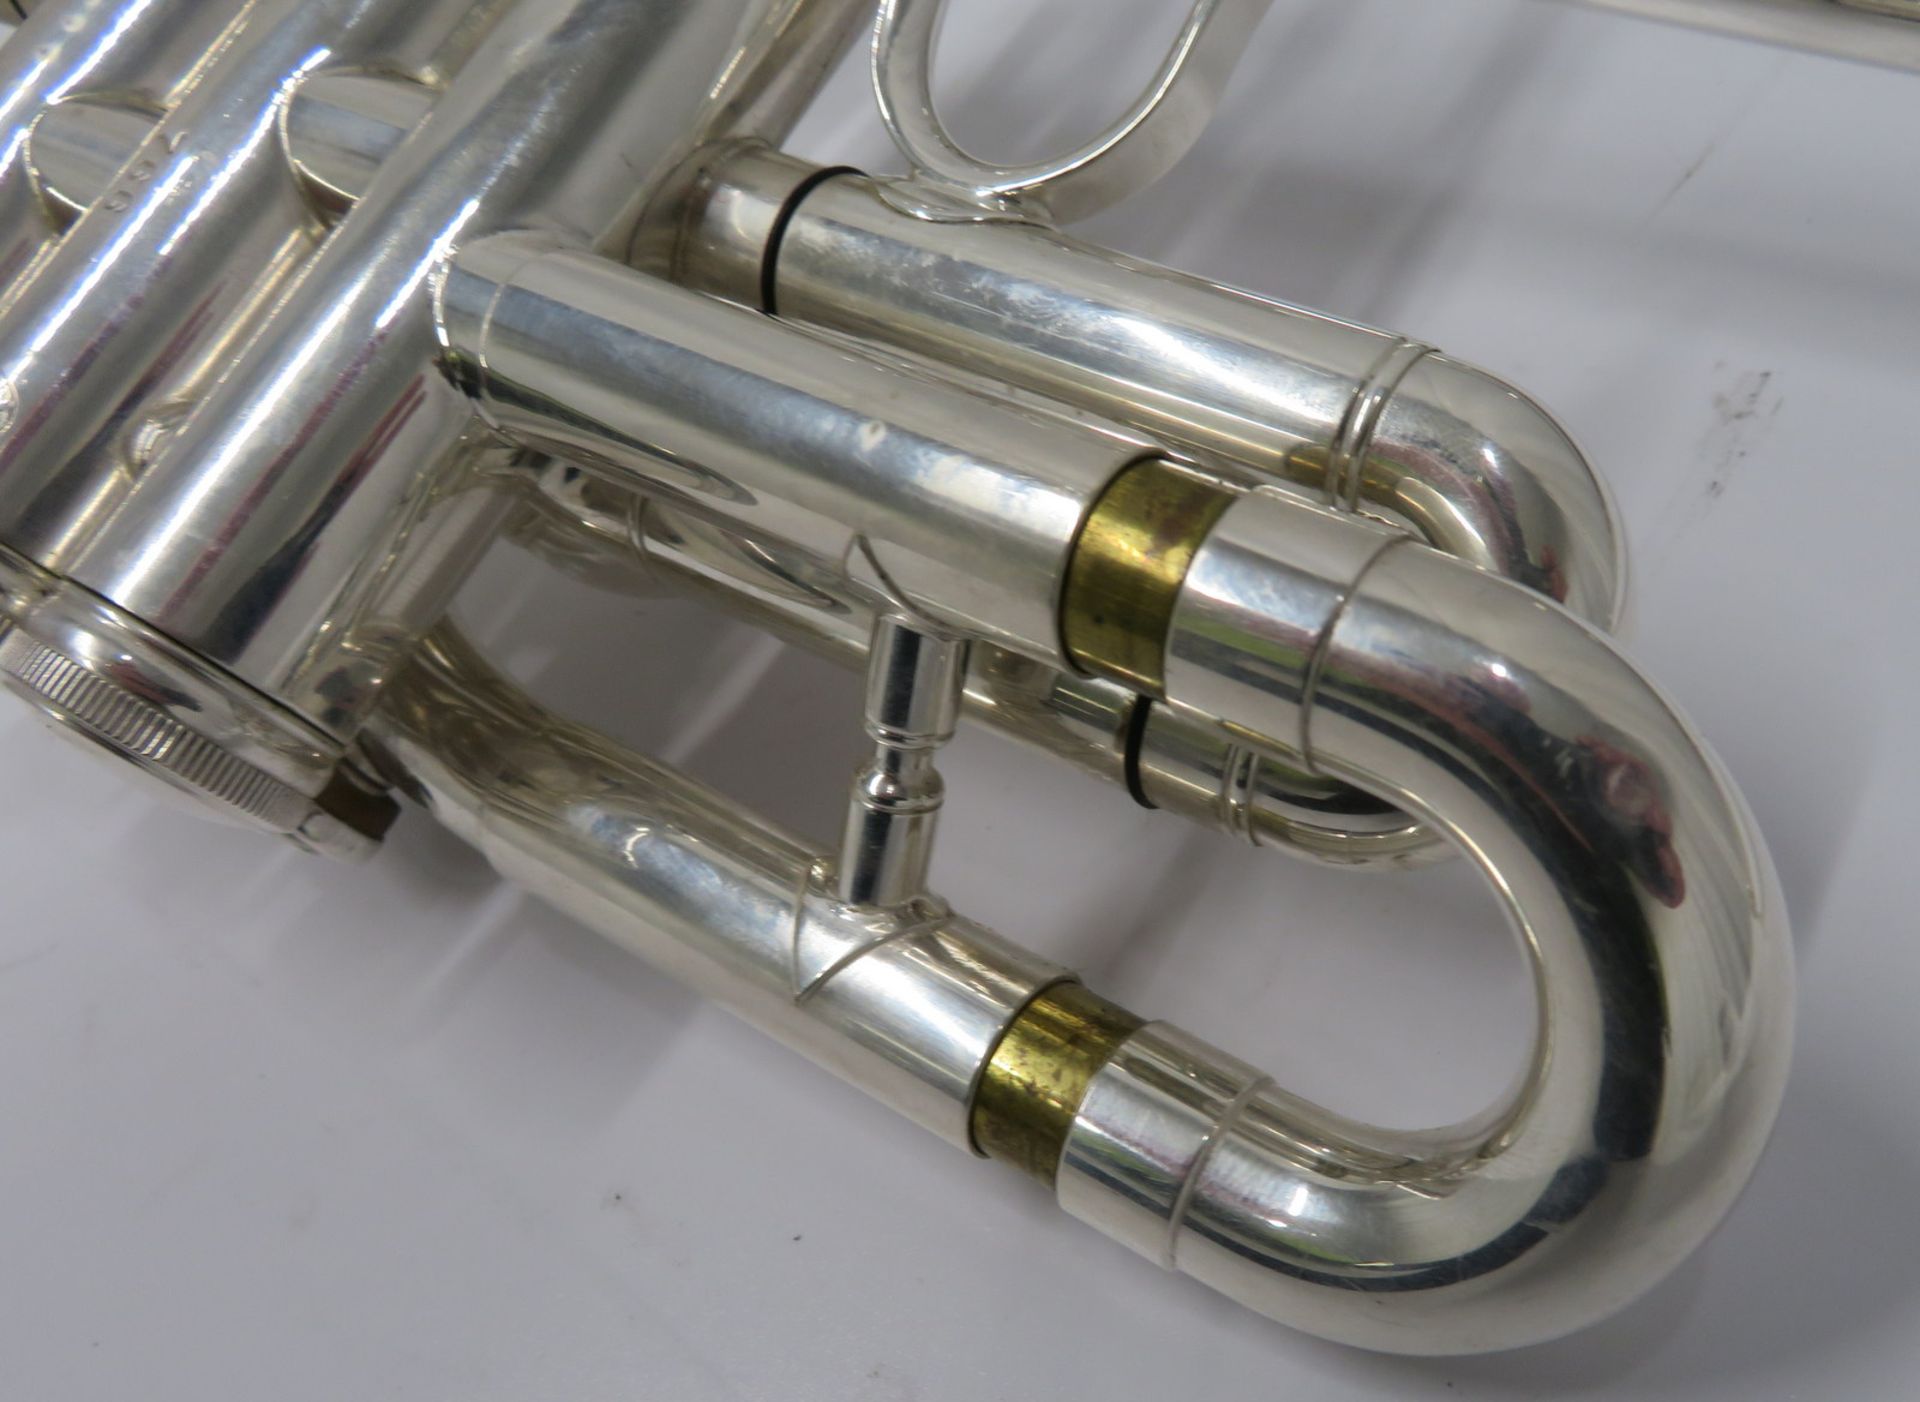 Smith-Watkins fanfare trumpet with case. Serial number: 766. - Image 7 of 14